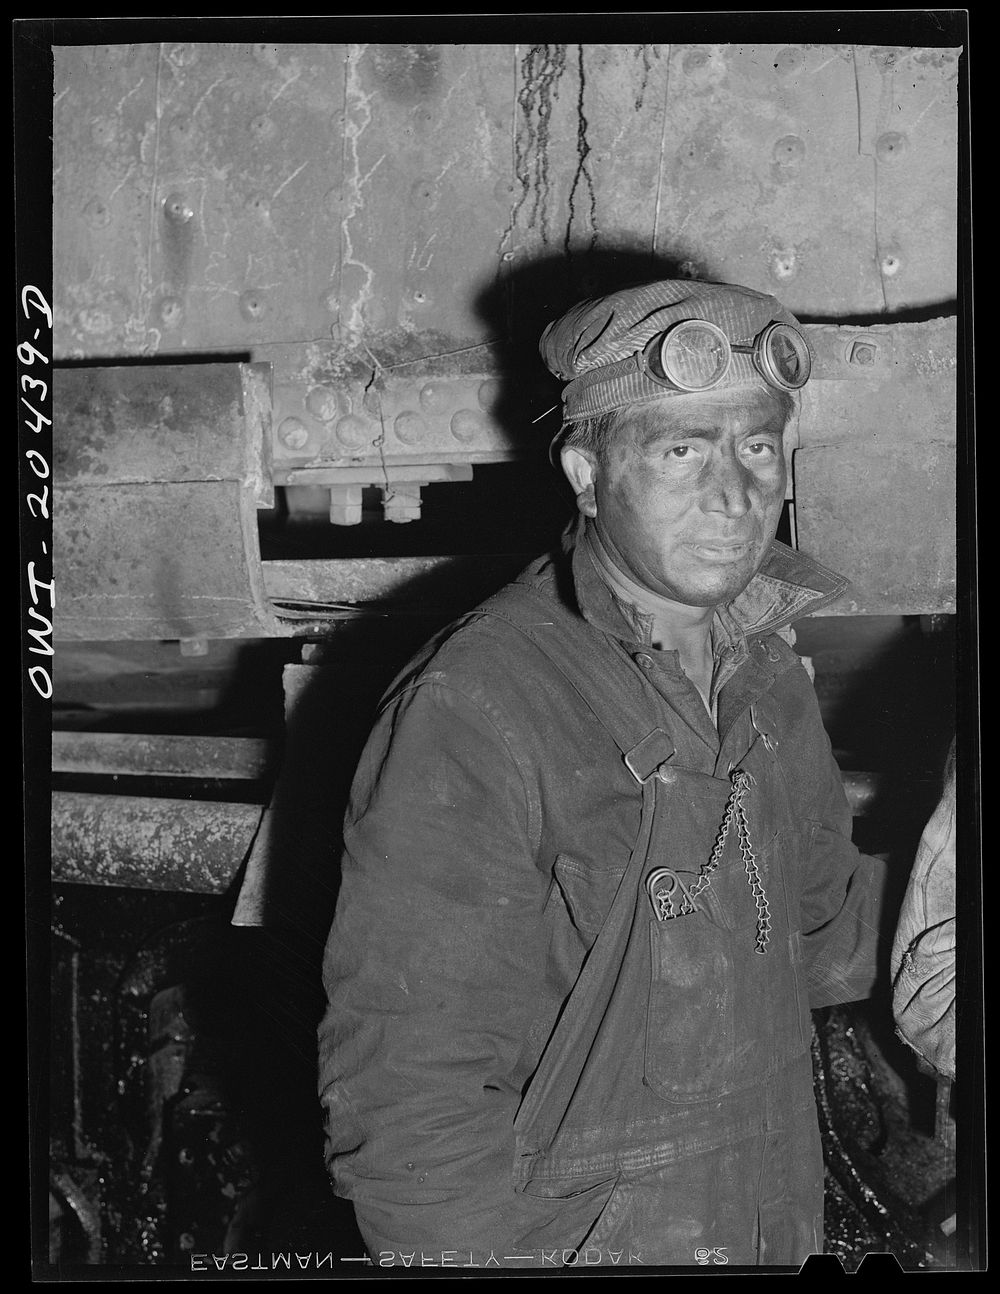 Albuquerque, New Mexico. Andrew Santiago, boilermaker, employed at the Atchison, Topeka and Santa Fe Railroad locomotive…